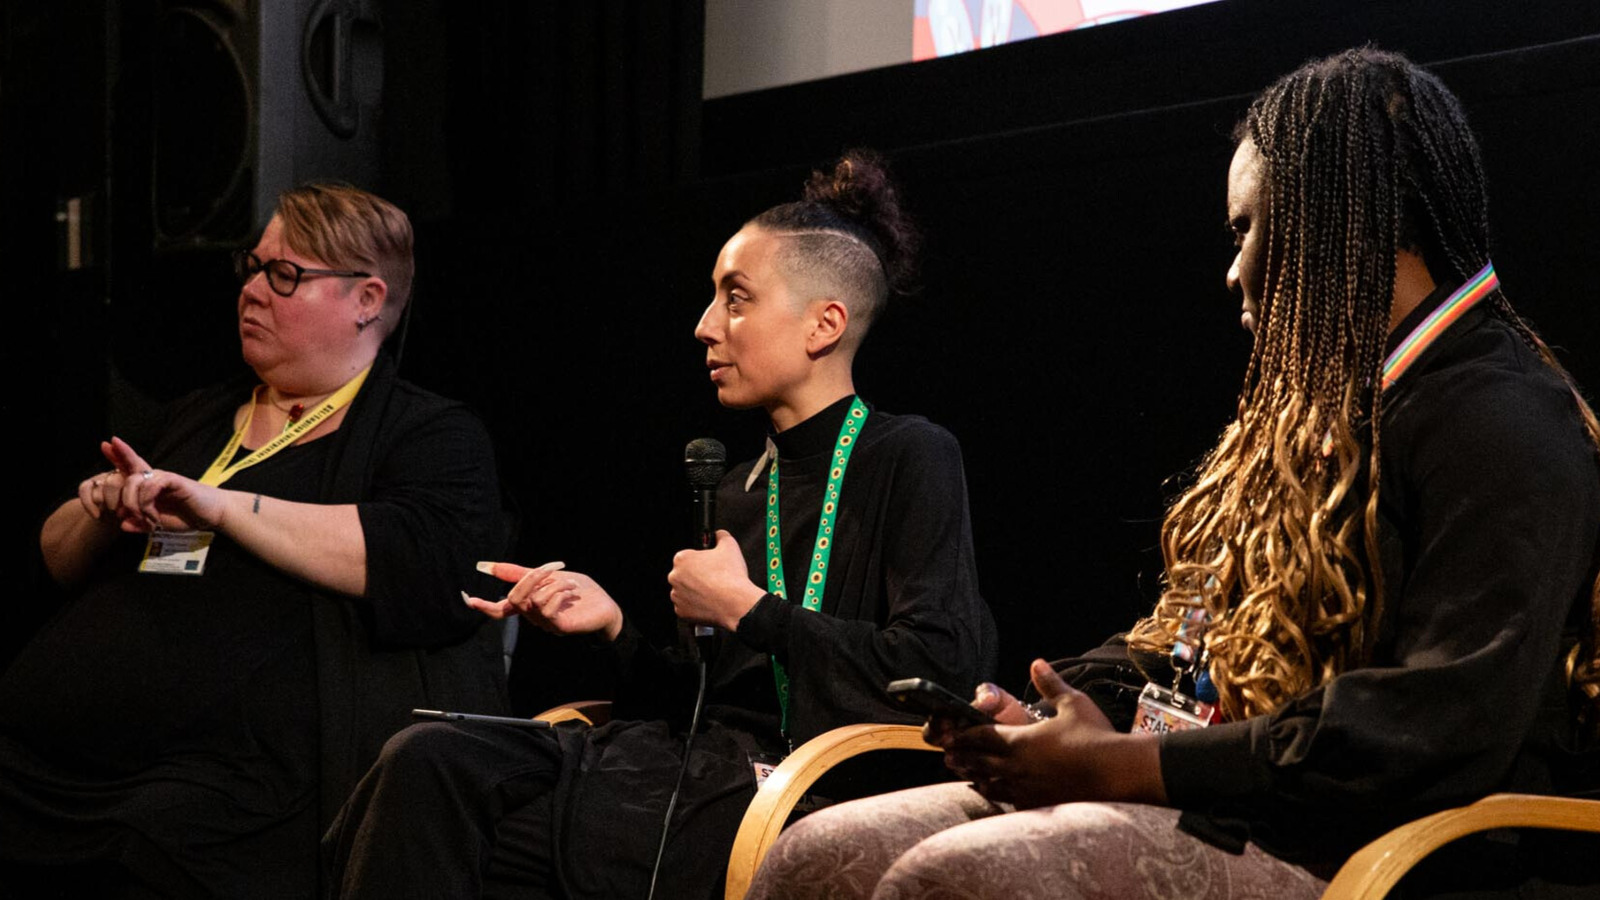 Three people sit on stage taking part in a panel discussion. One is holding a microphone and the other is doing British Sign Language.